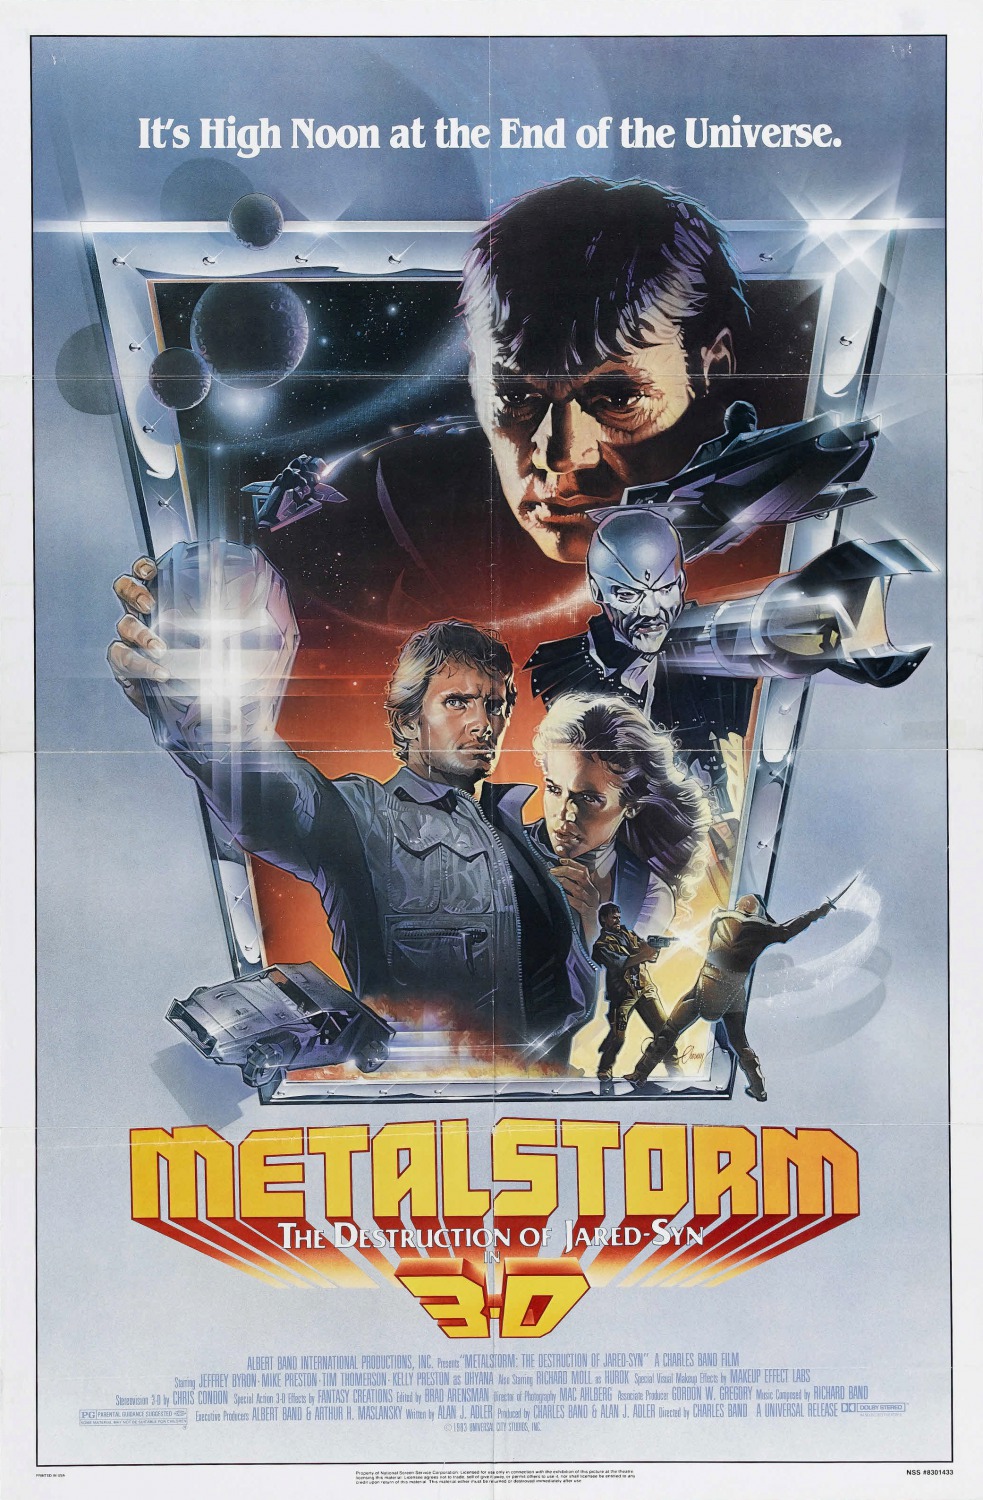 Extra Large Movie Poster Image for Metalstorm: The Destruction of Jared-Syn (#1 of 2)